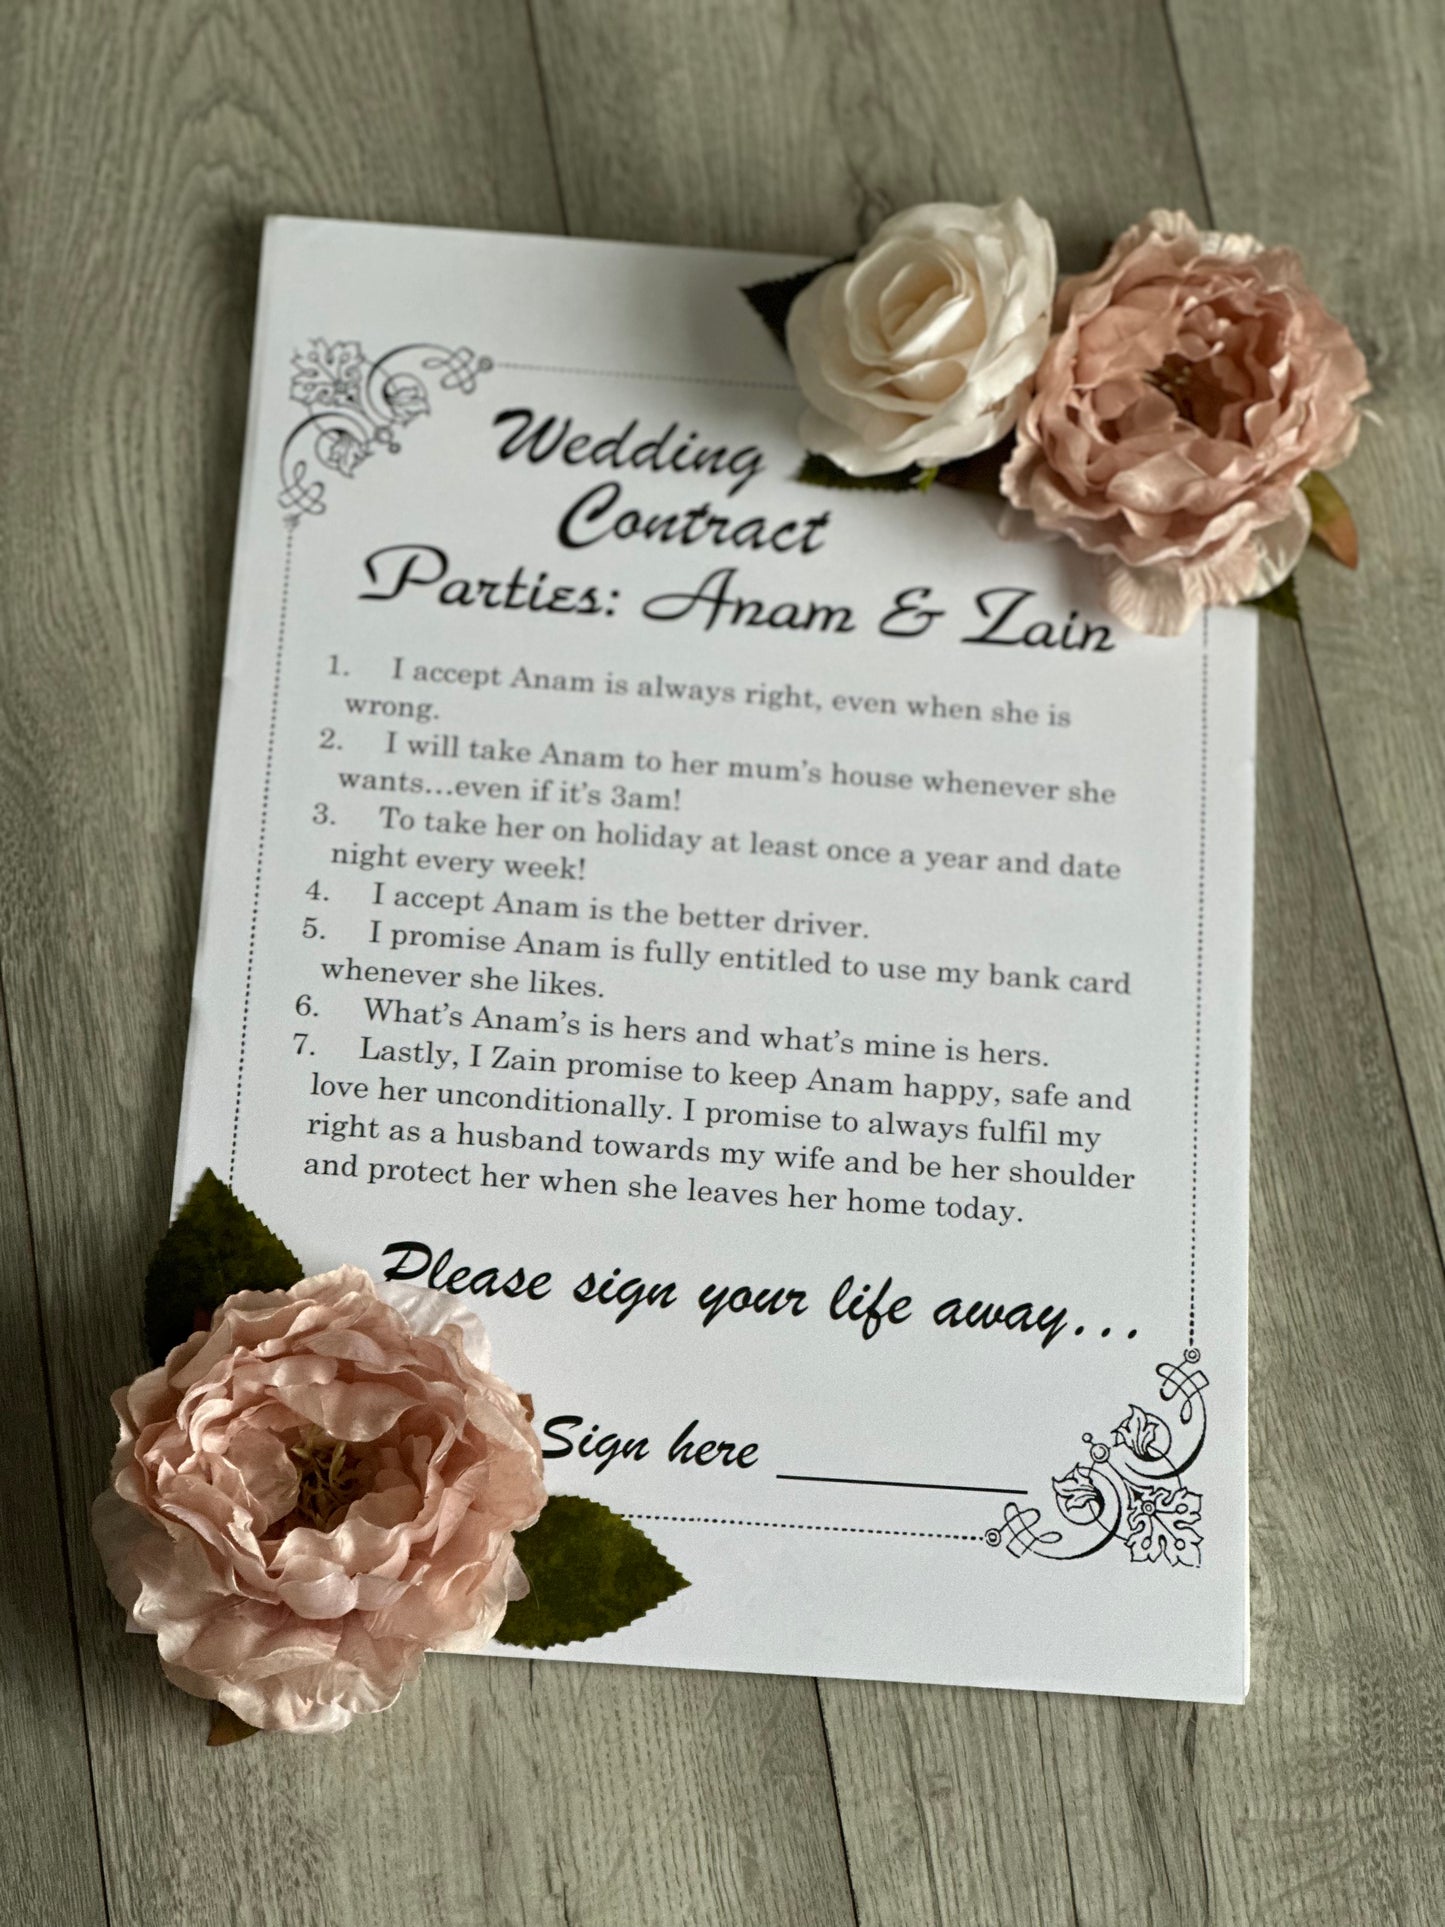 Funny wedding contracts